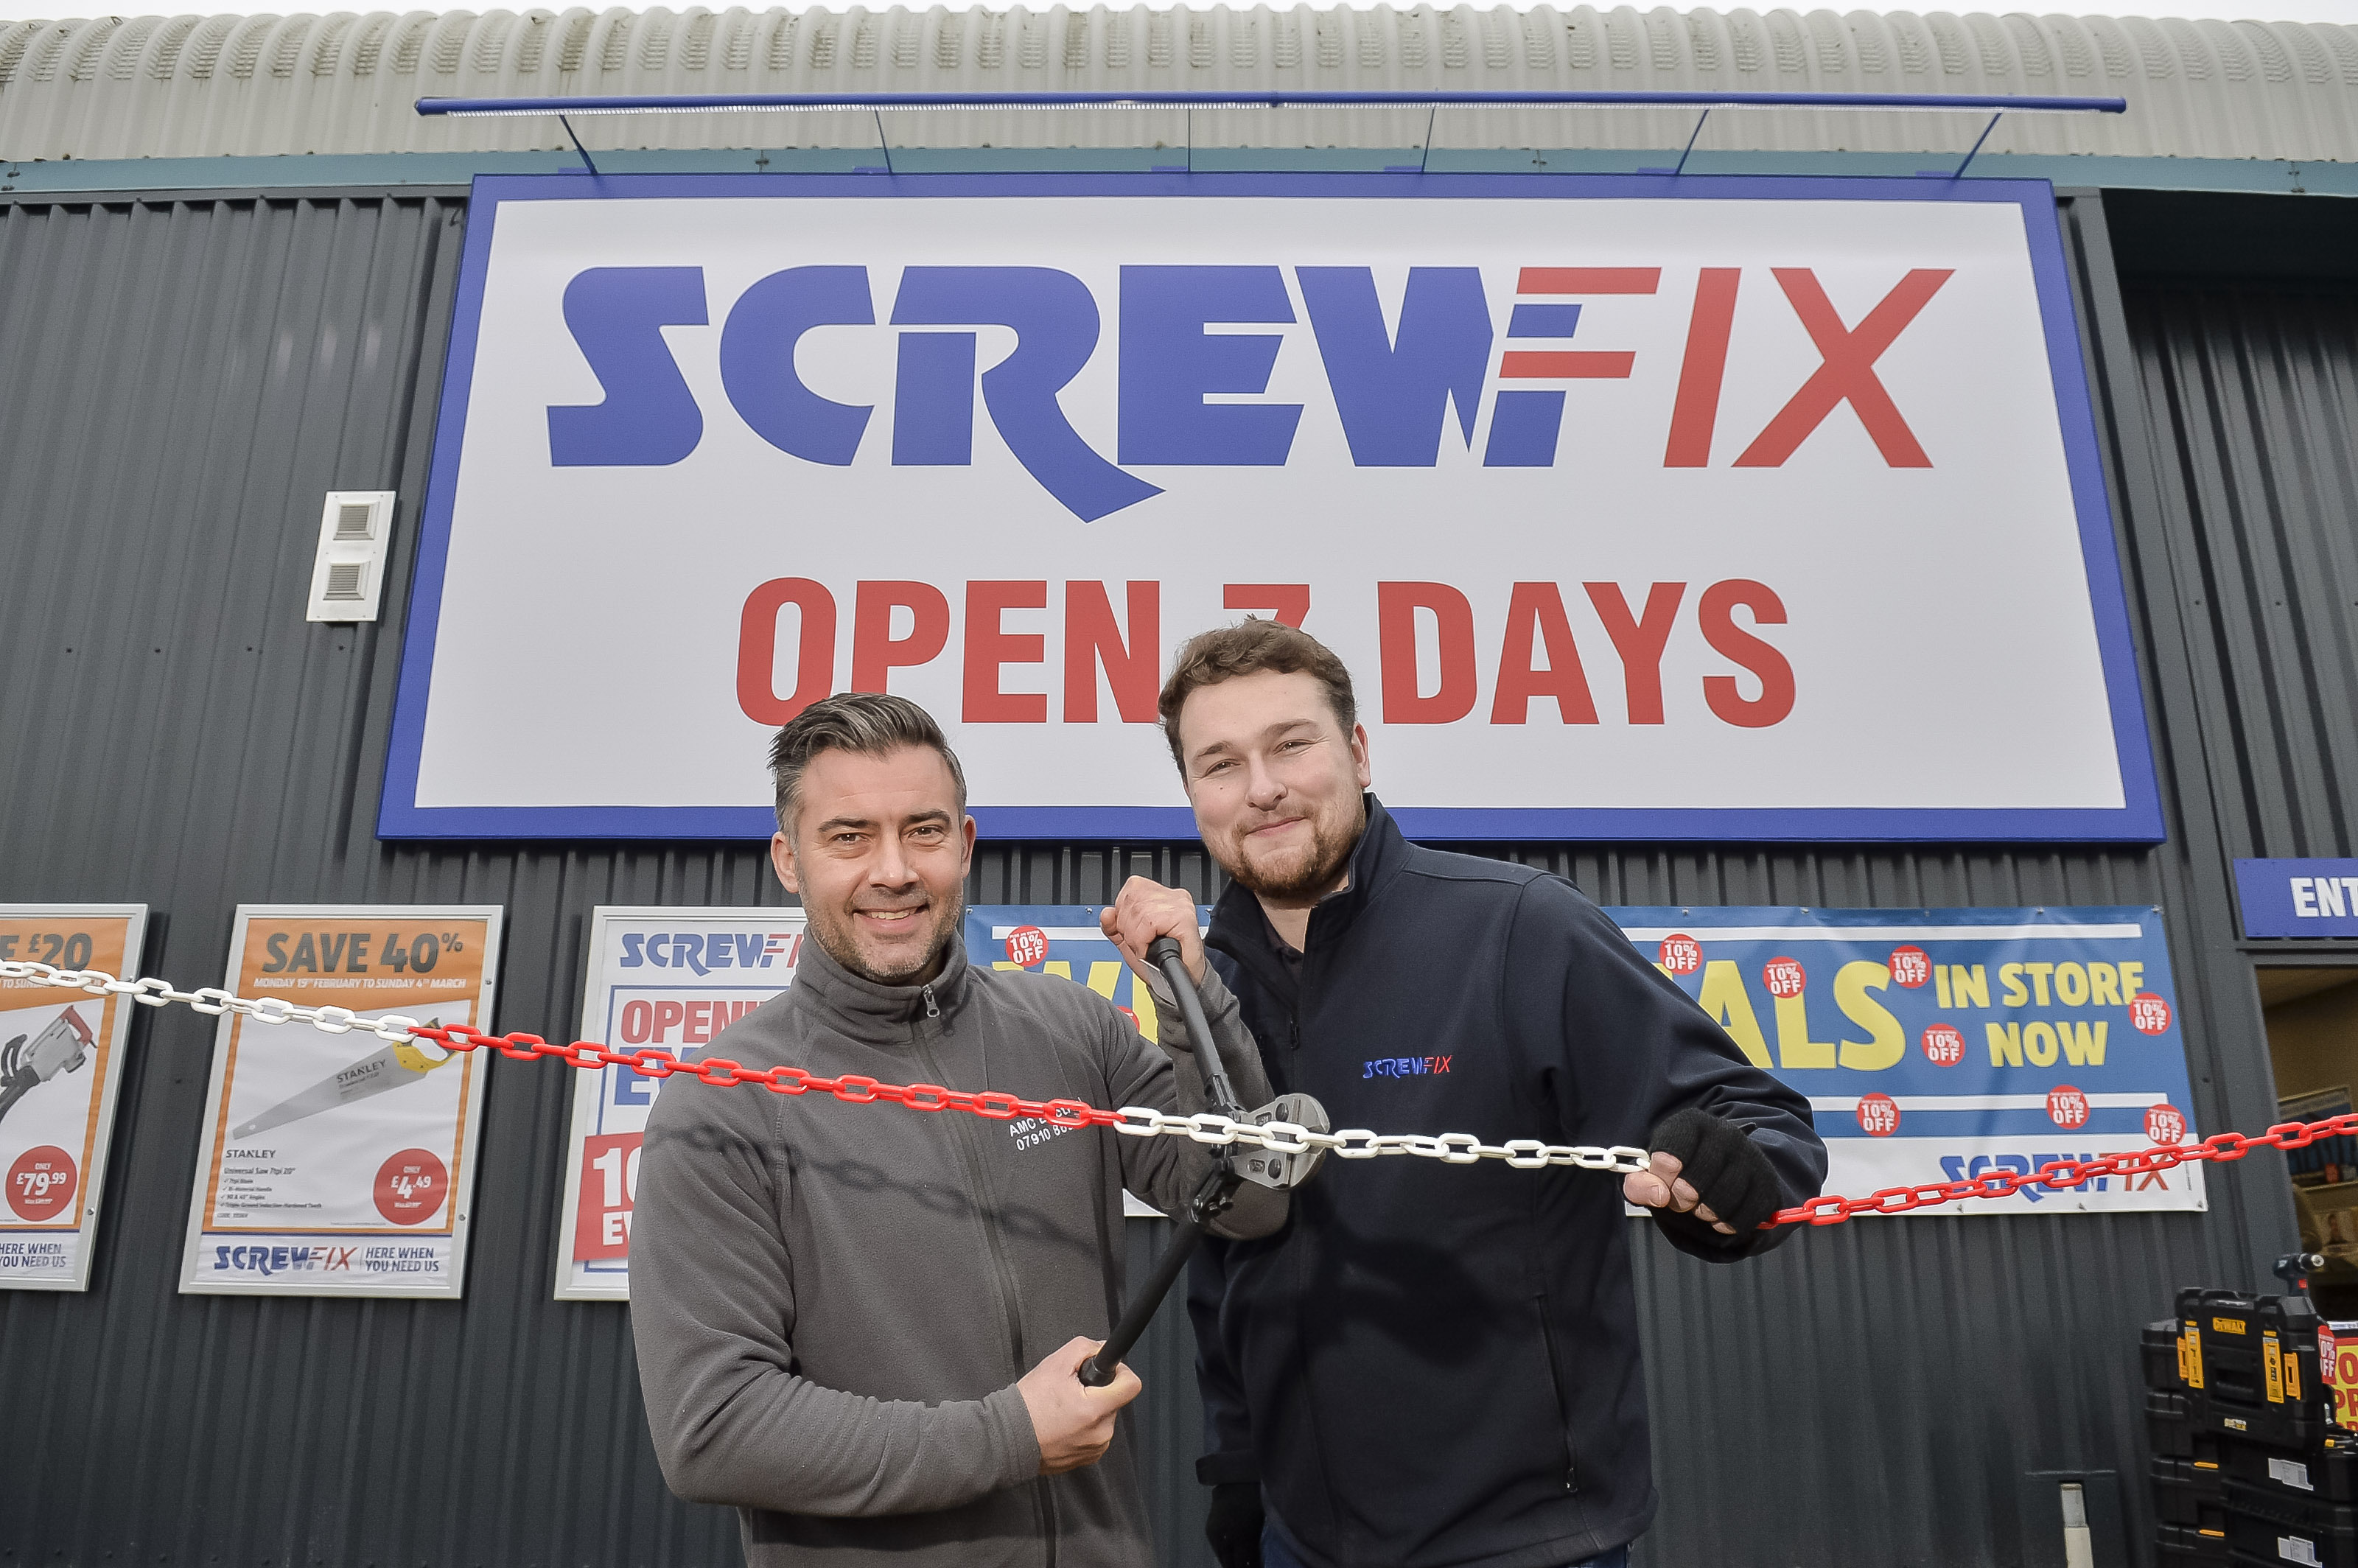 Northampton’s third Screwfix store is declared a runaway success